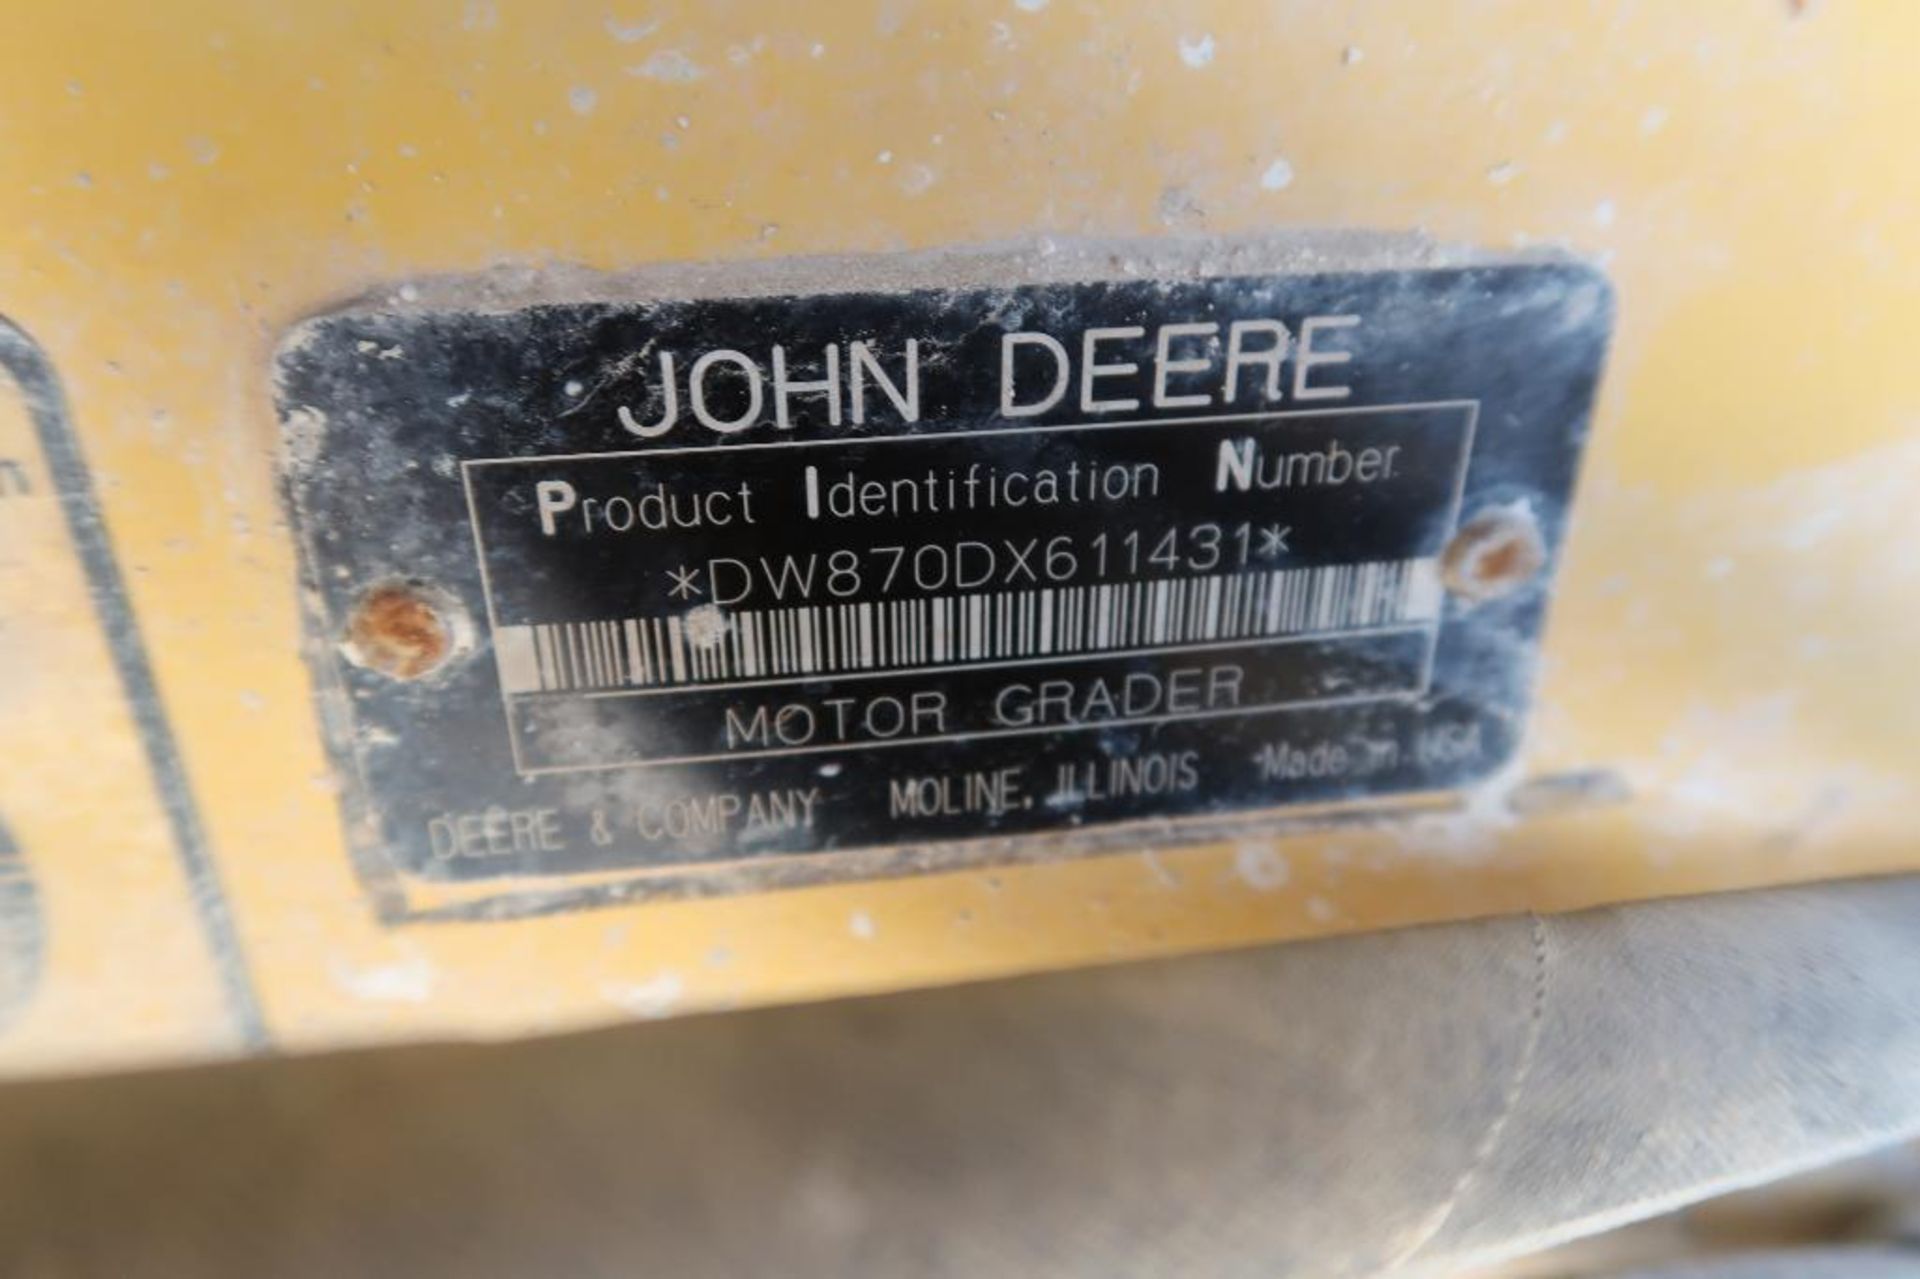 2007 John Deere Motor Grader Model 870D, S/N DW870DX611431, with Ripper (10,340 hours indicated) - Image 8 of 8